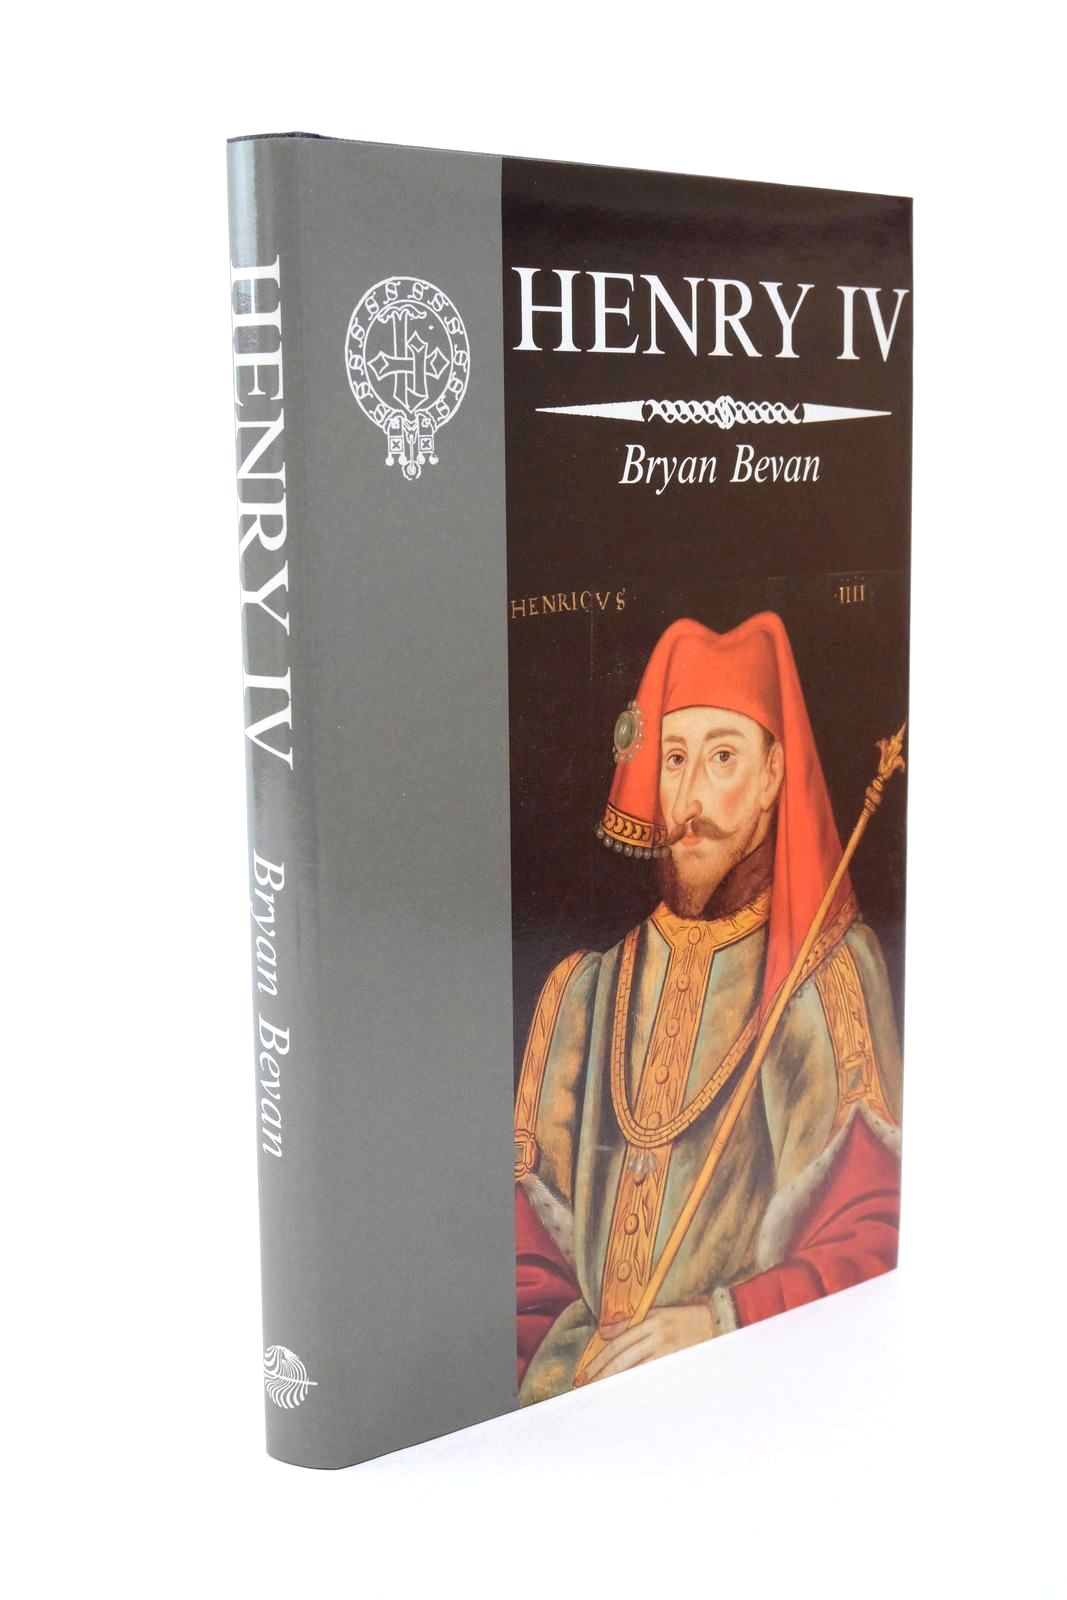 Photo of HENRY IV- Stock Number: 1322607